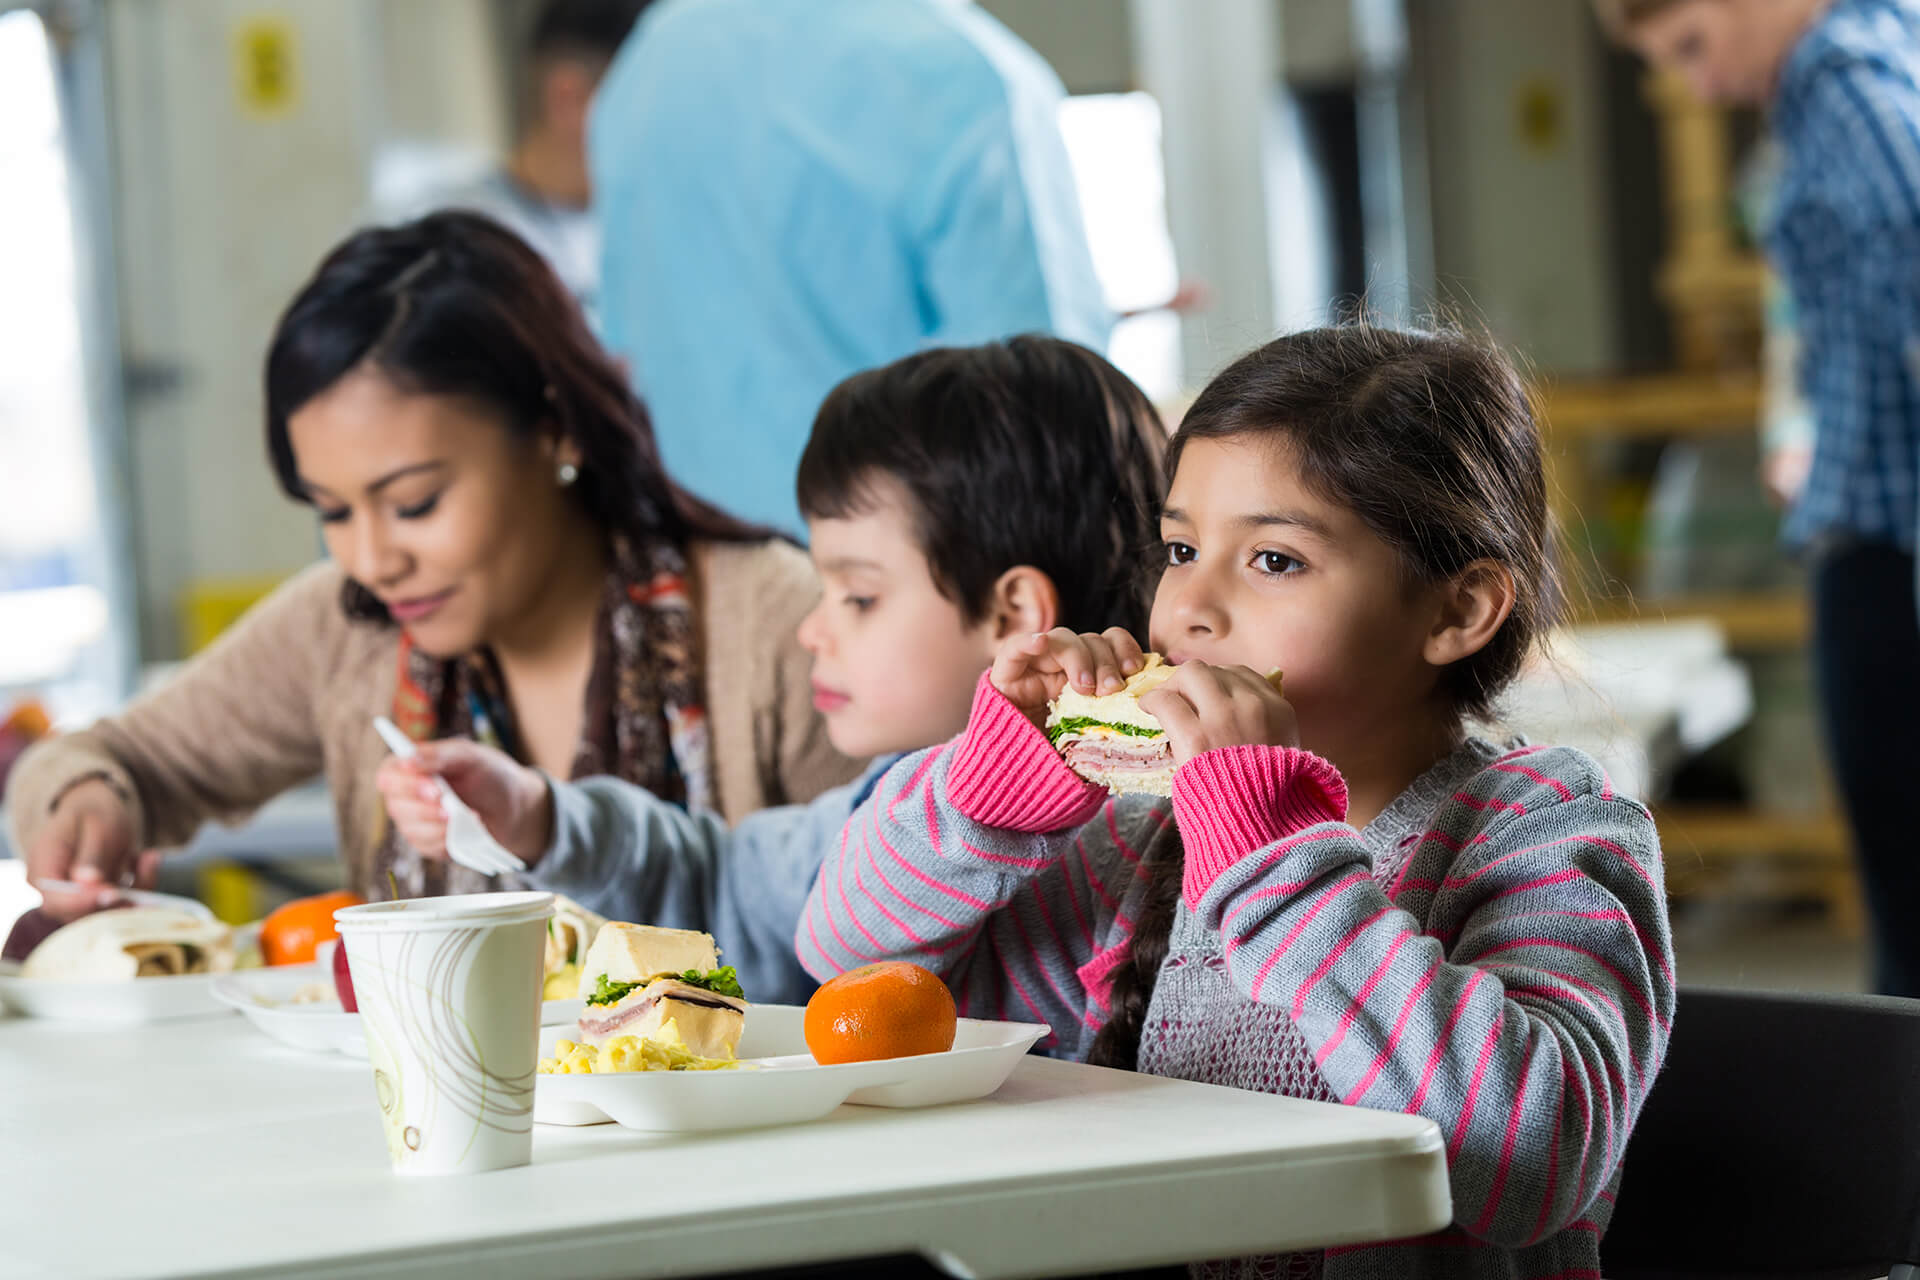 Child eating sandwich at table with mom and sibling